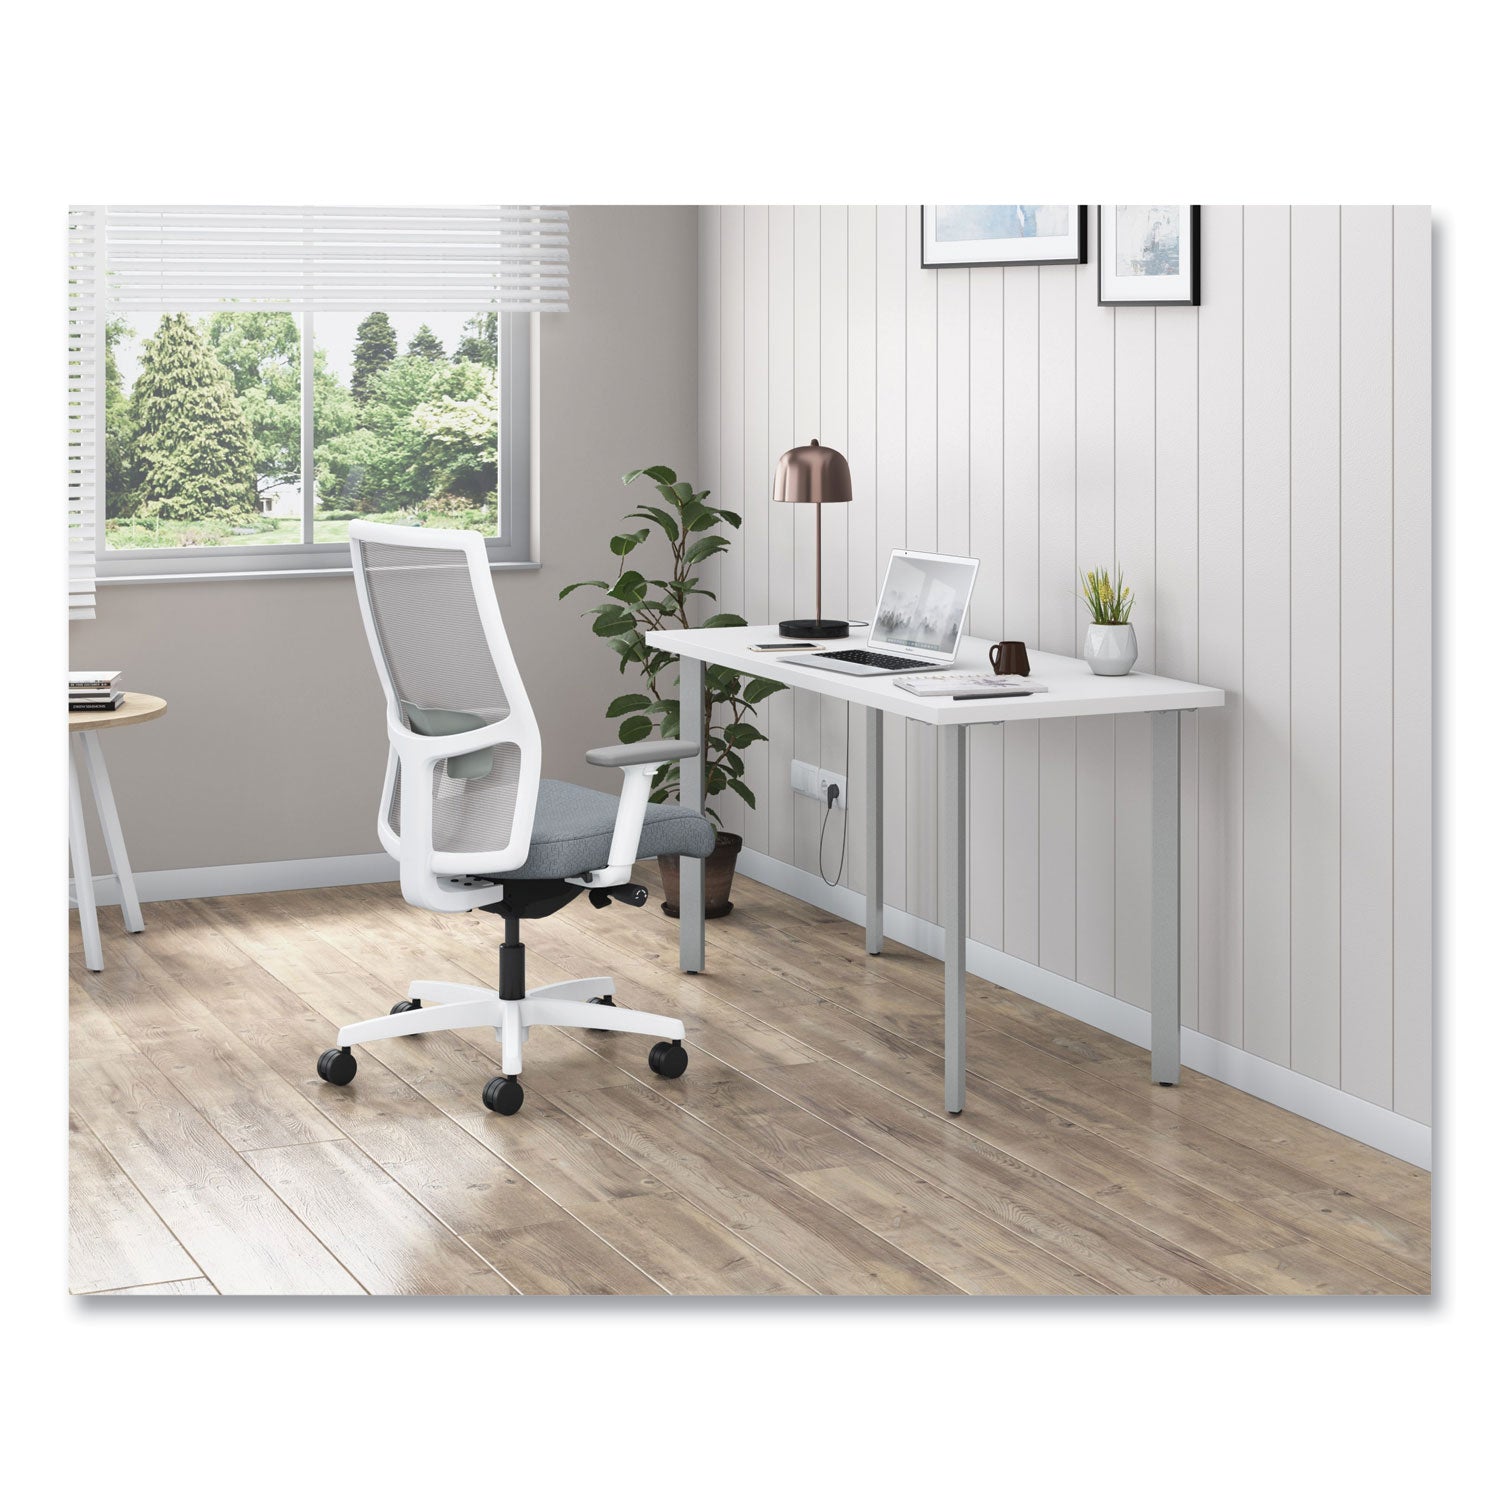 ignition-20-4-way-stretch-mid-back-mesh-task-chair-gray-adjustable-lumbar-support-basalt-fog-white-ships-in-7-10-bus-days_honi2mm2afa25tx - 3